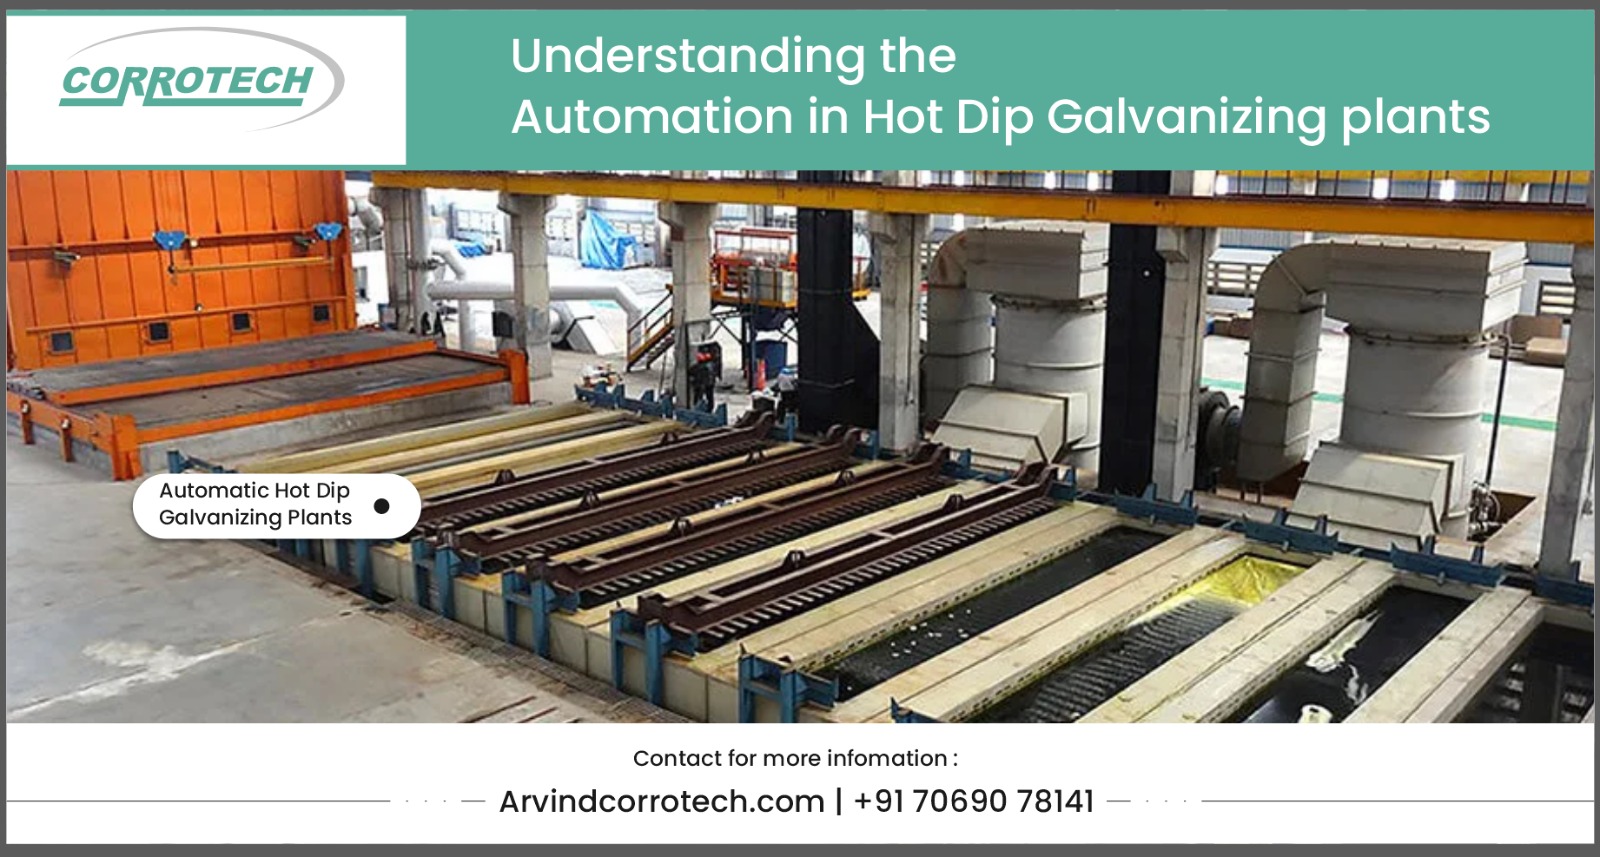 Understanding the Automation in Hot Dip Galvanizing plants